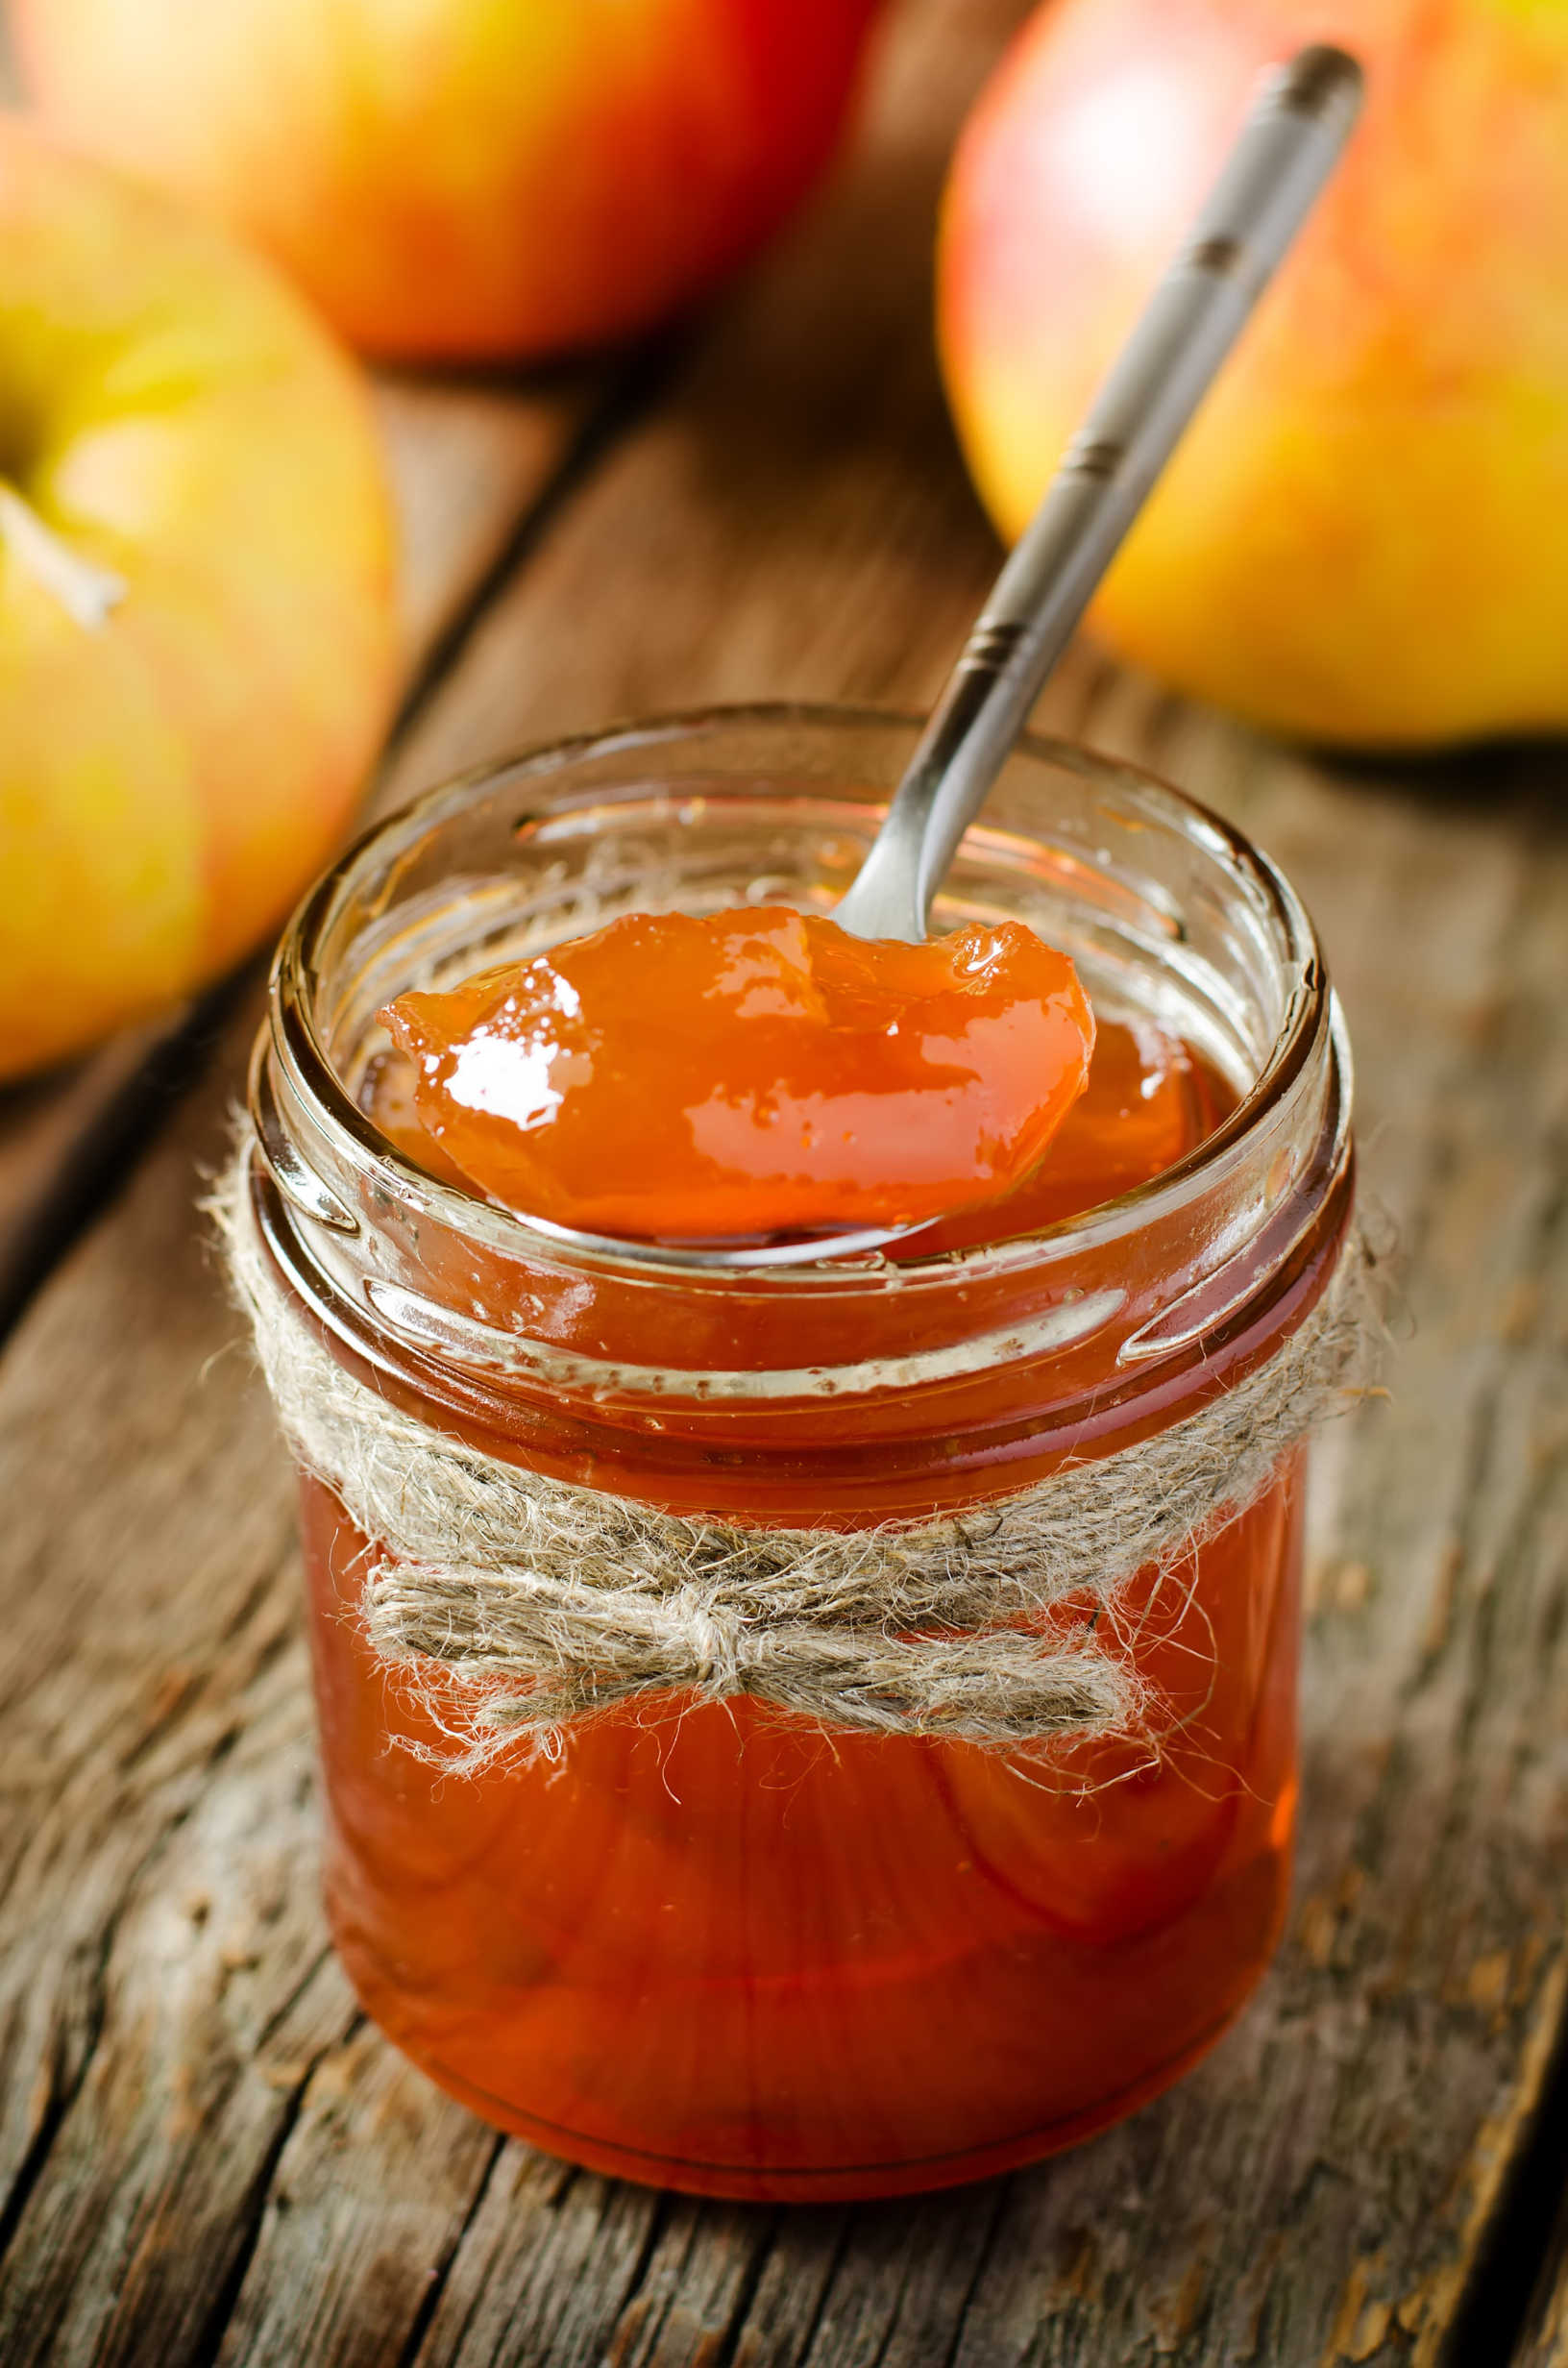 Old Fashioned Apple Jelly Recipe For Canning